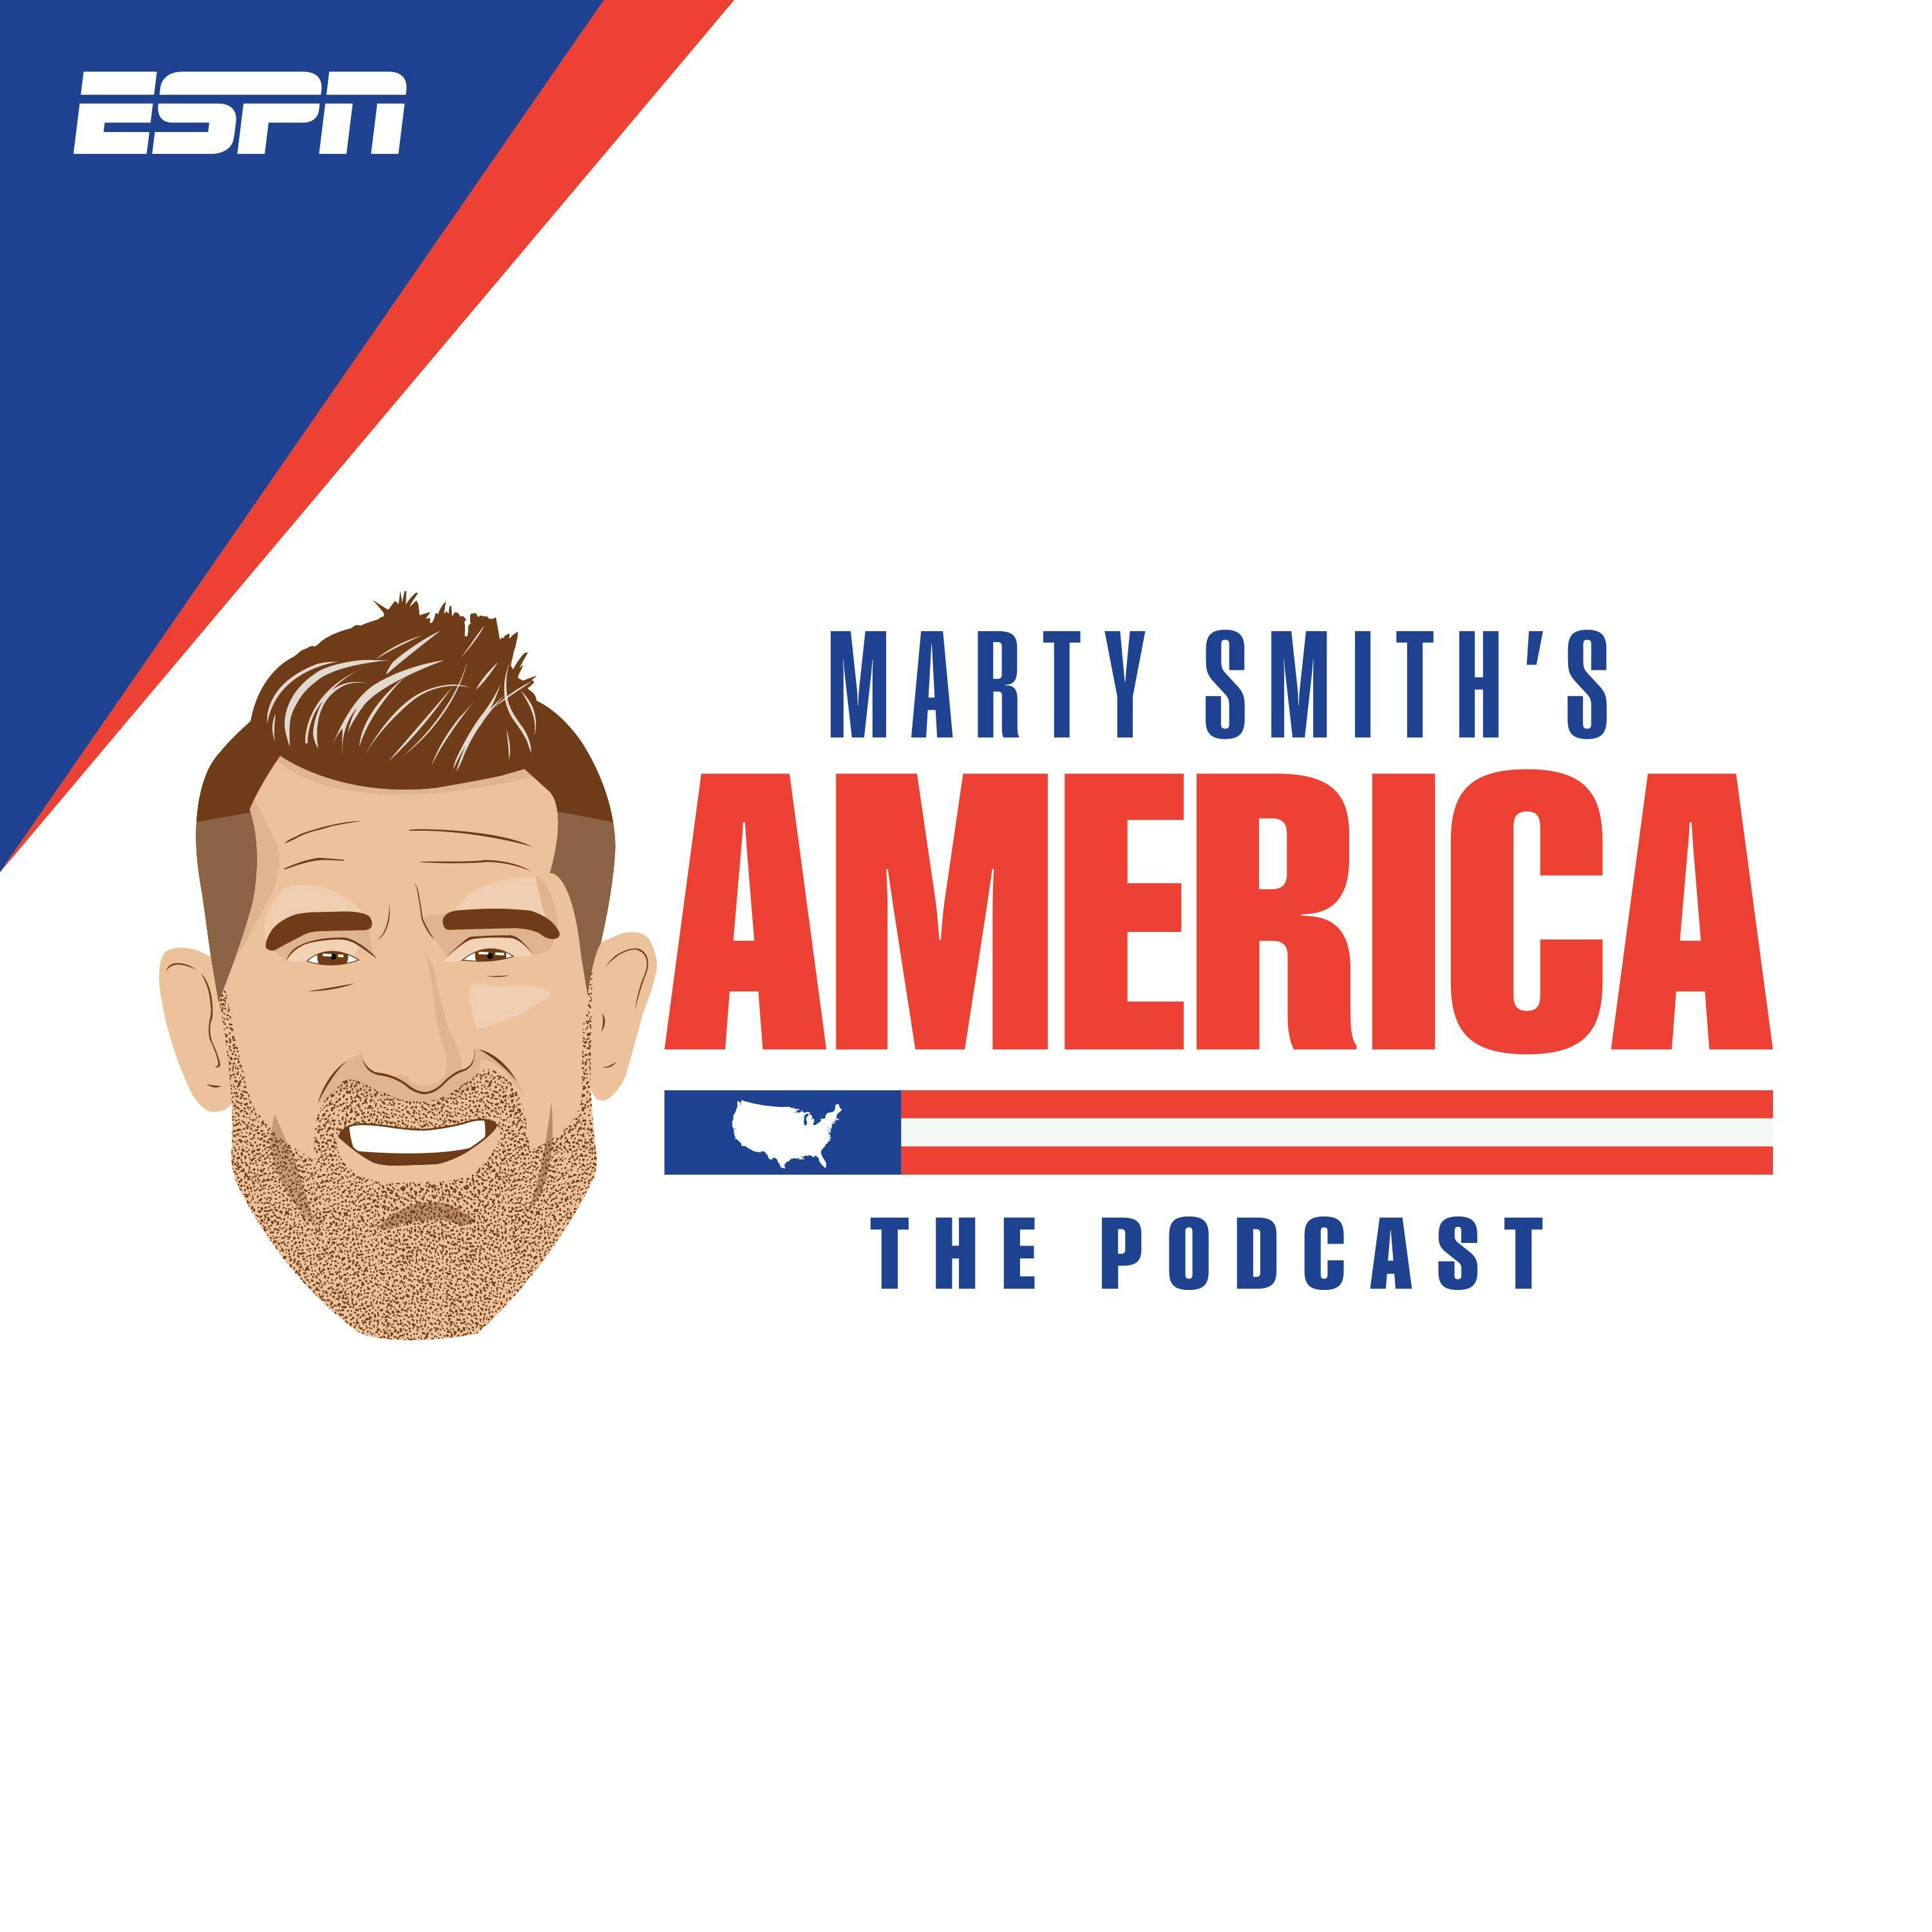 Marty Smith's America The Podcast podcast